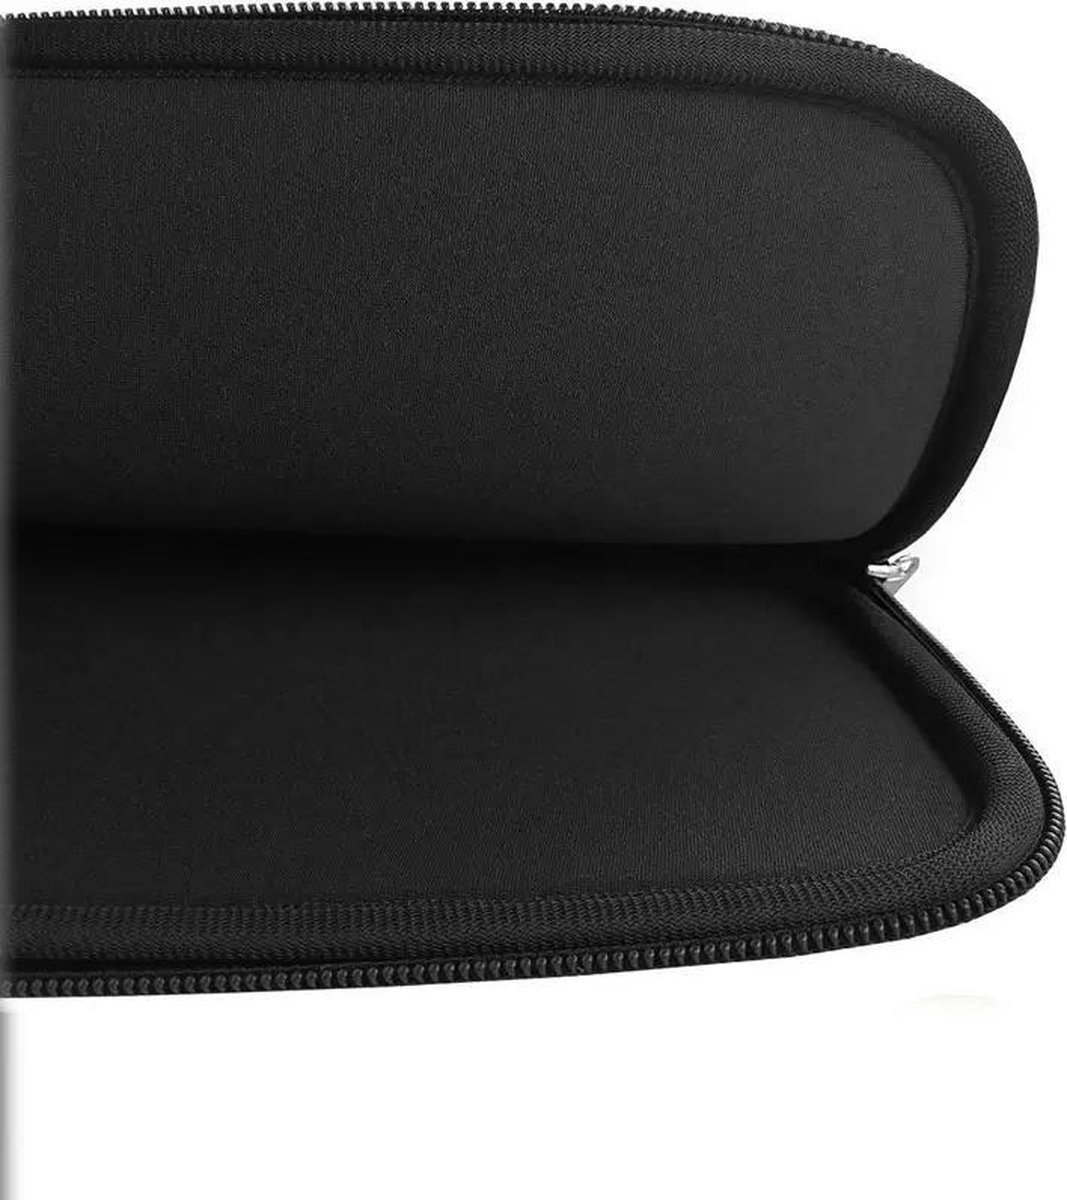 PureFinish - SoftTouch Laptophoes 15.6 inch - Macbook / IPad / Thinkpad - Sleeve met ritssluiting